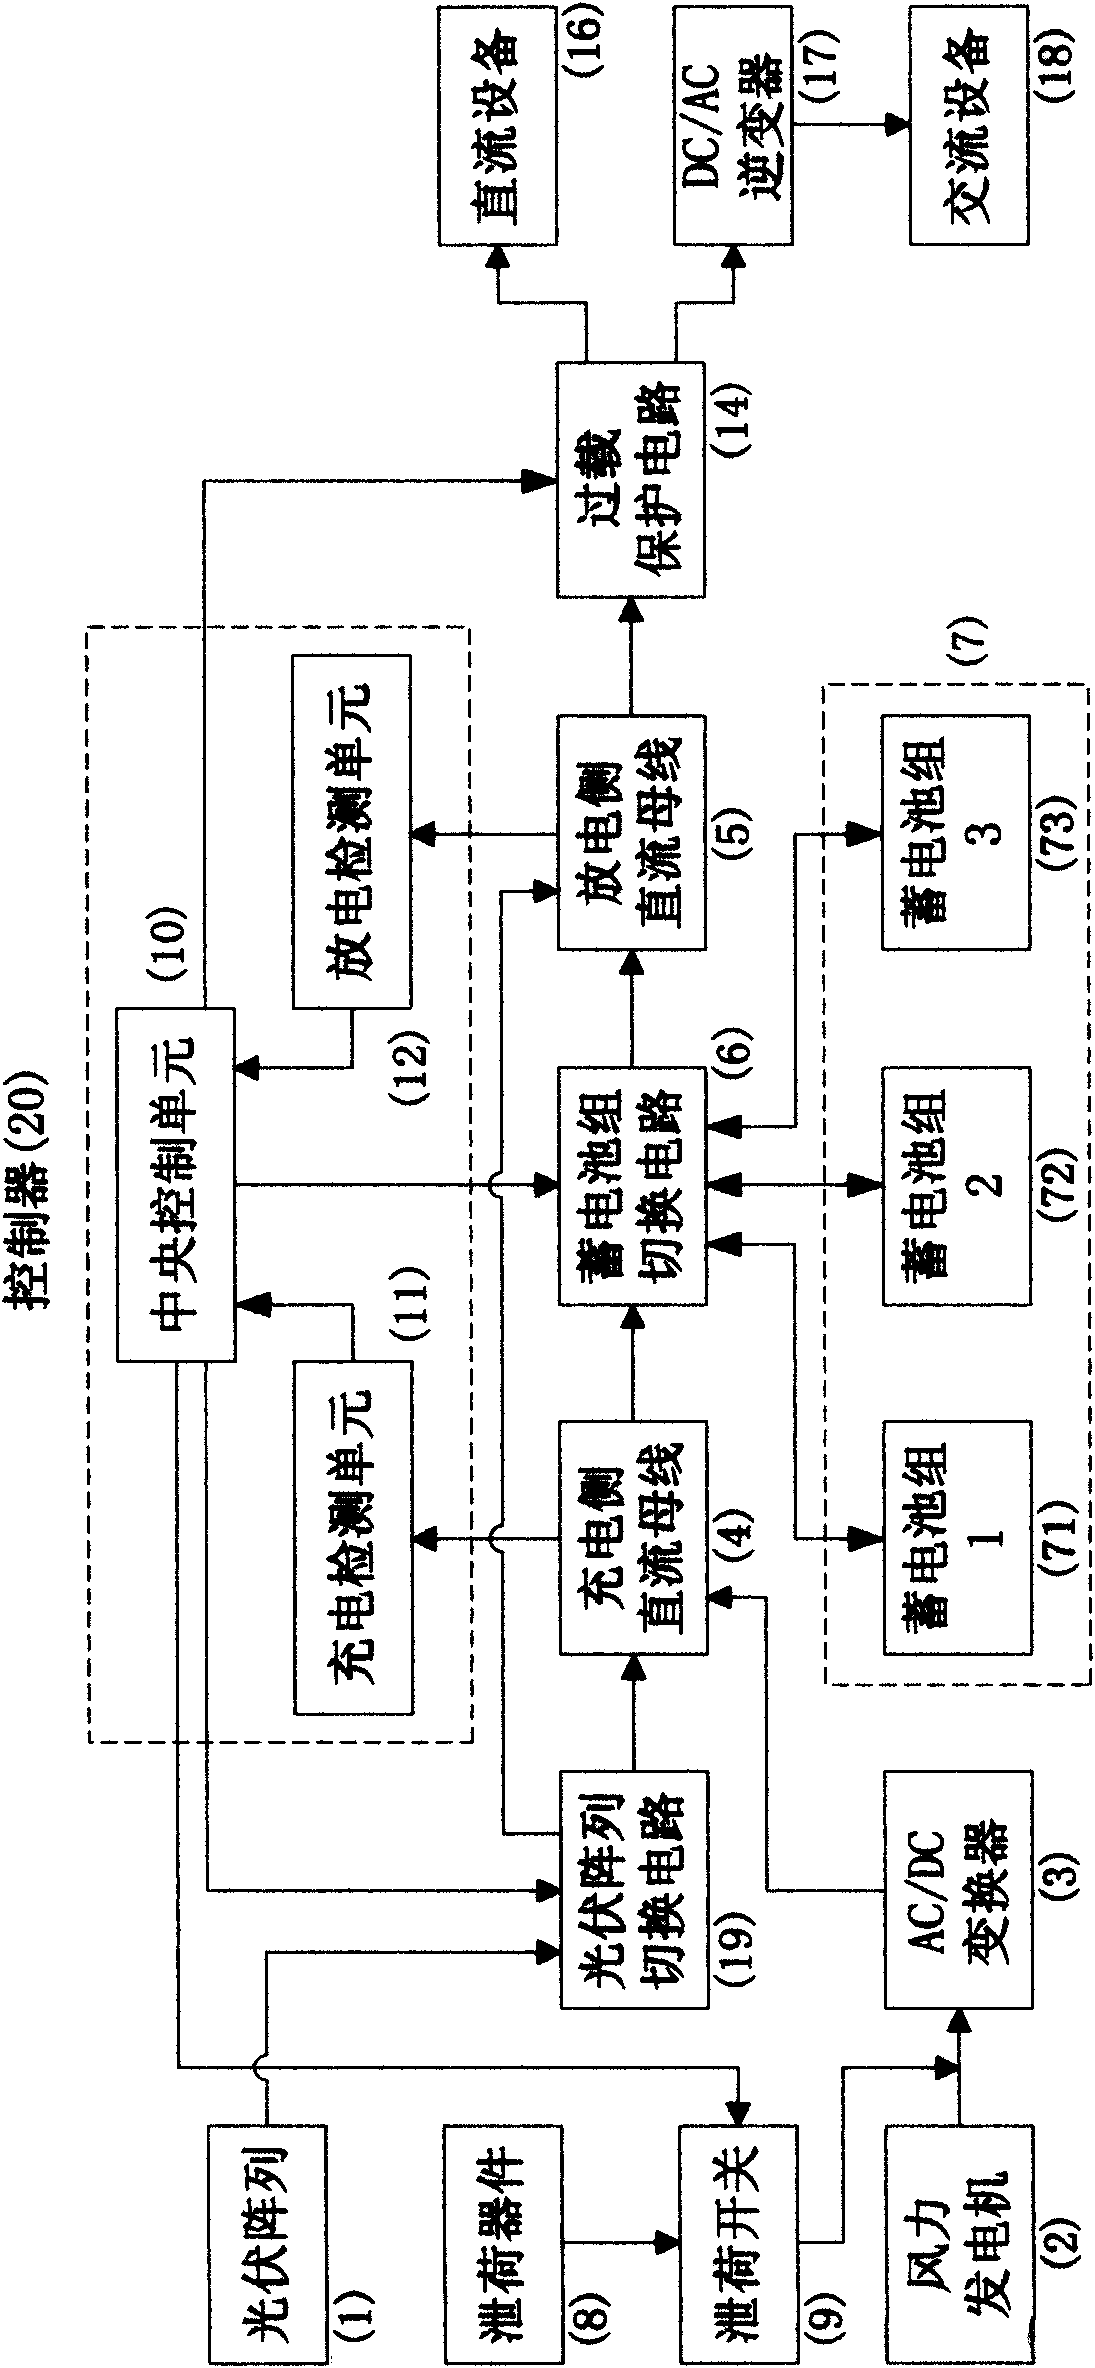 Wind and solar hybrid generation system for communication base station based on dual direct-current bus control